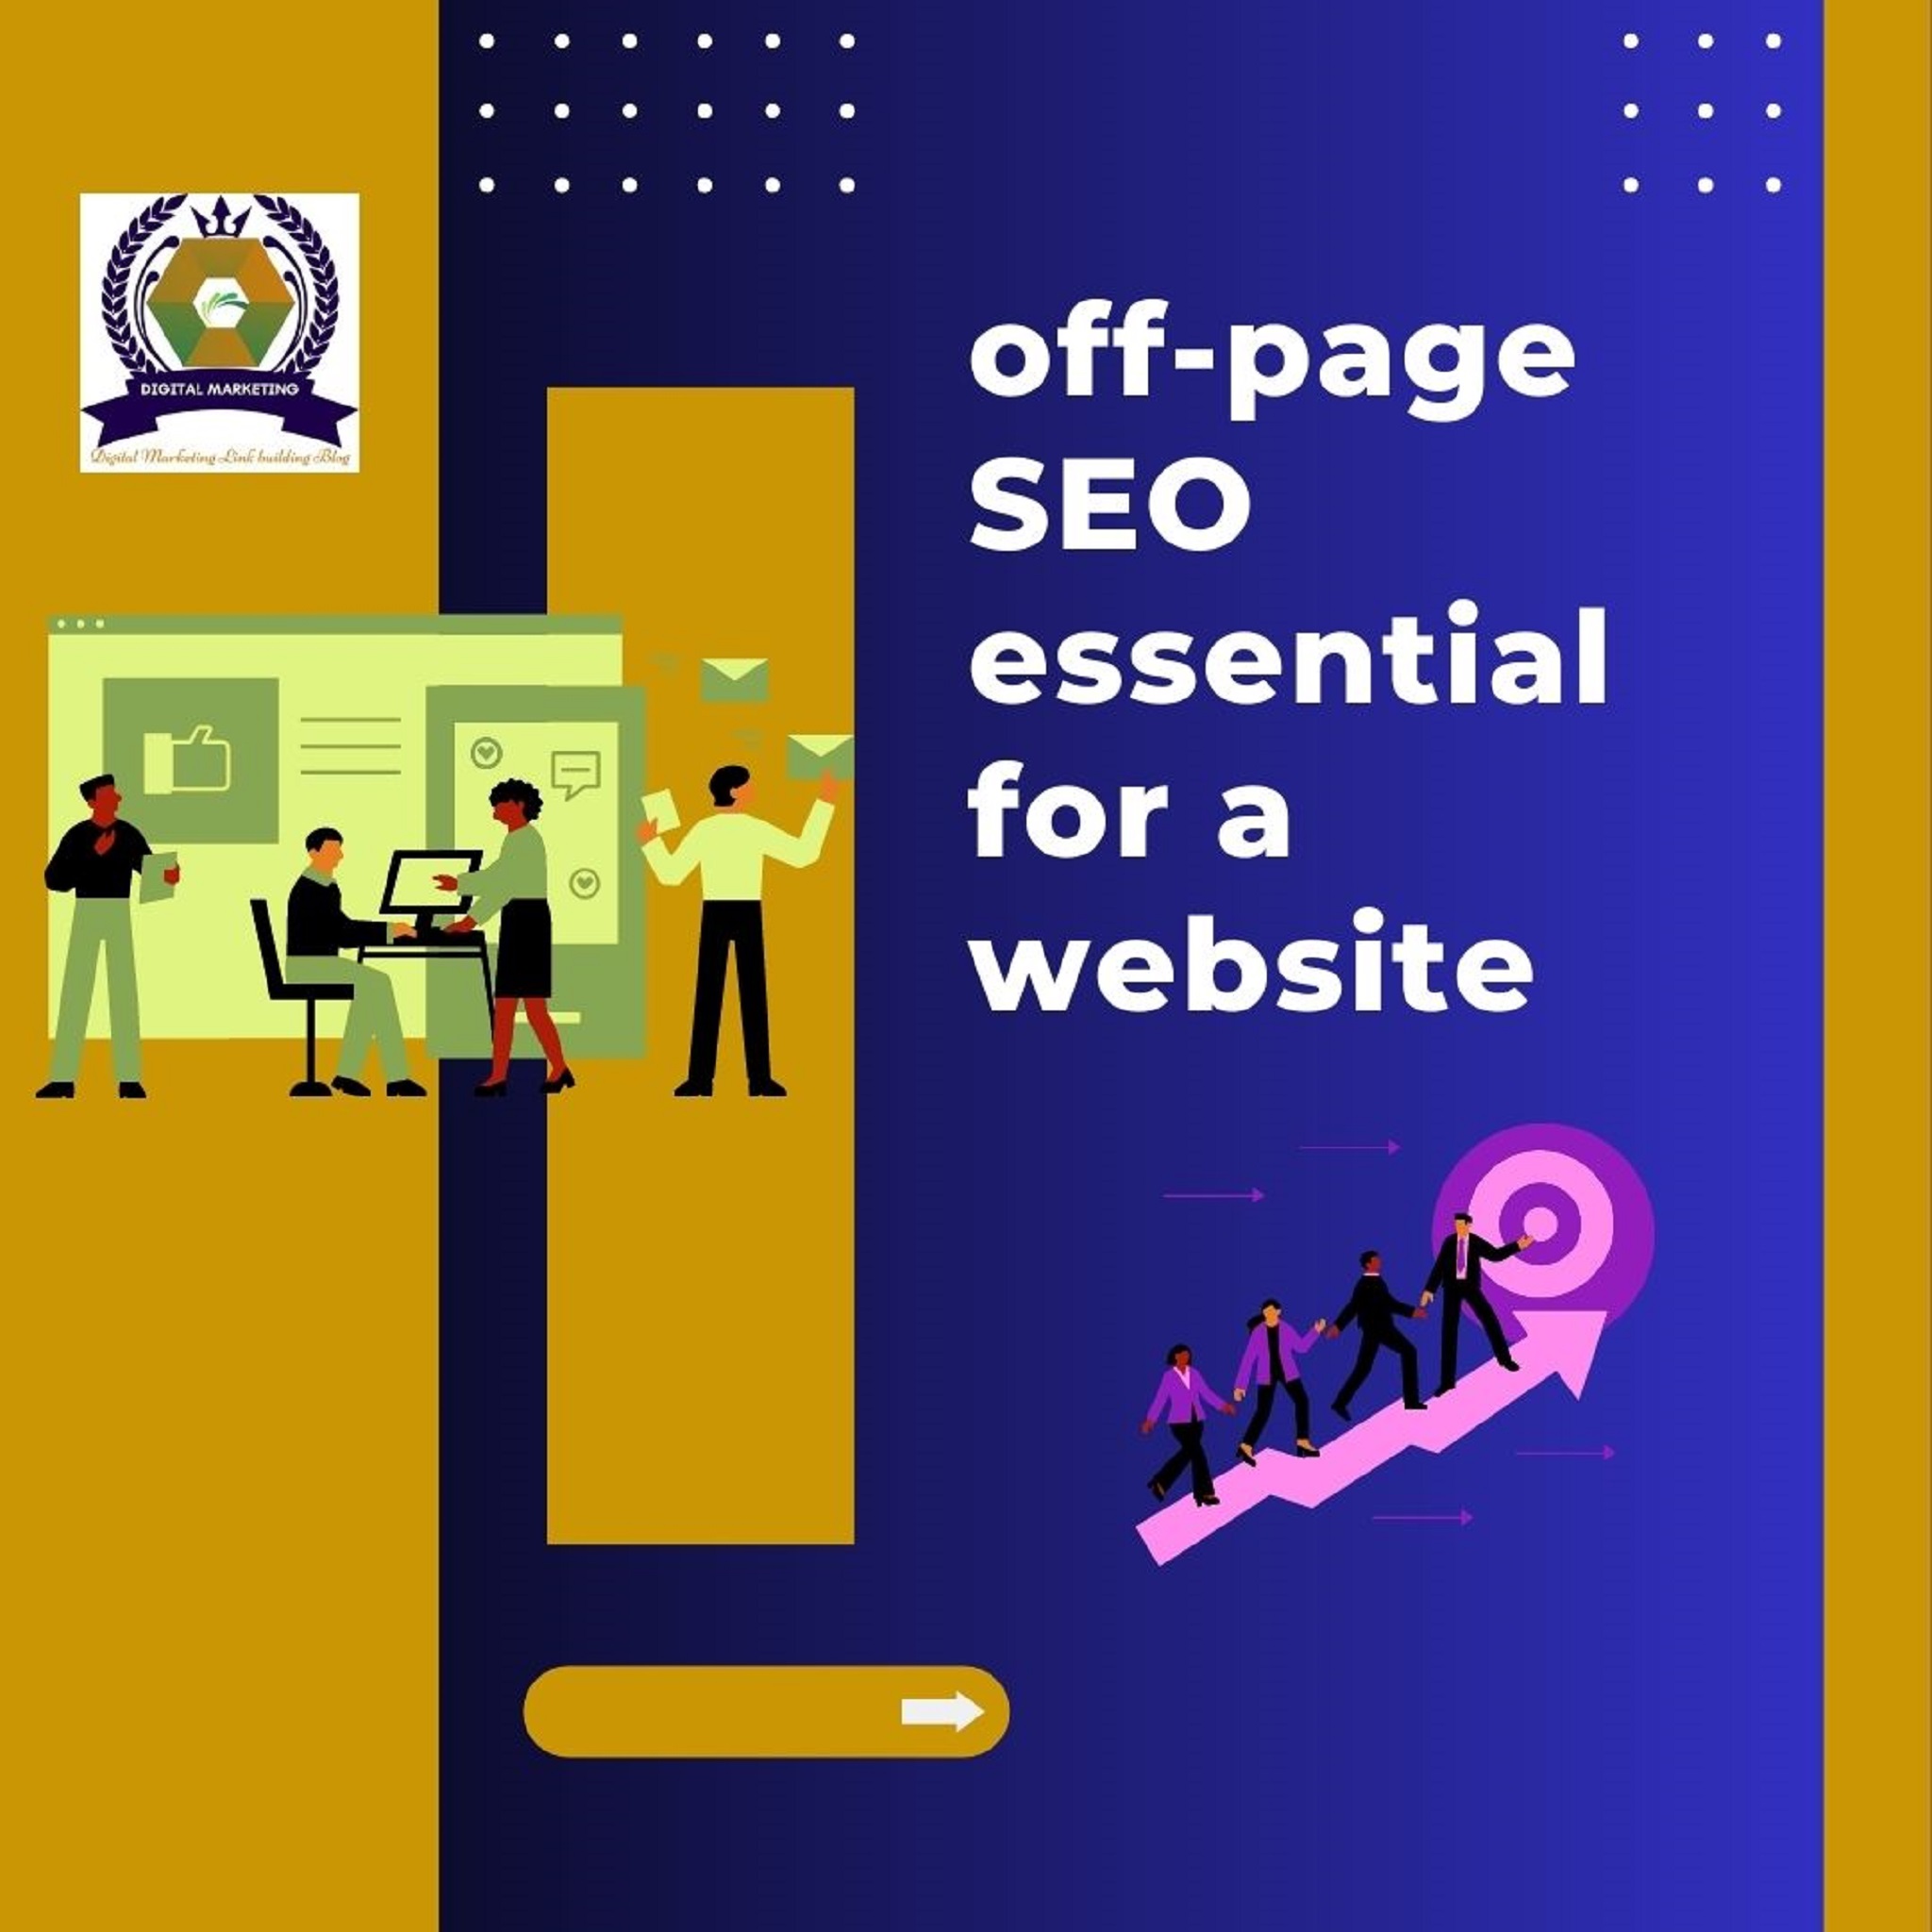 off-page SEO essential for a website